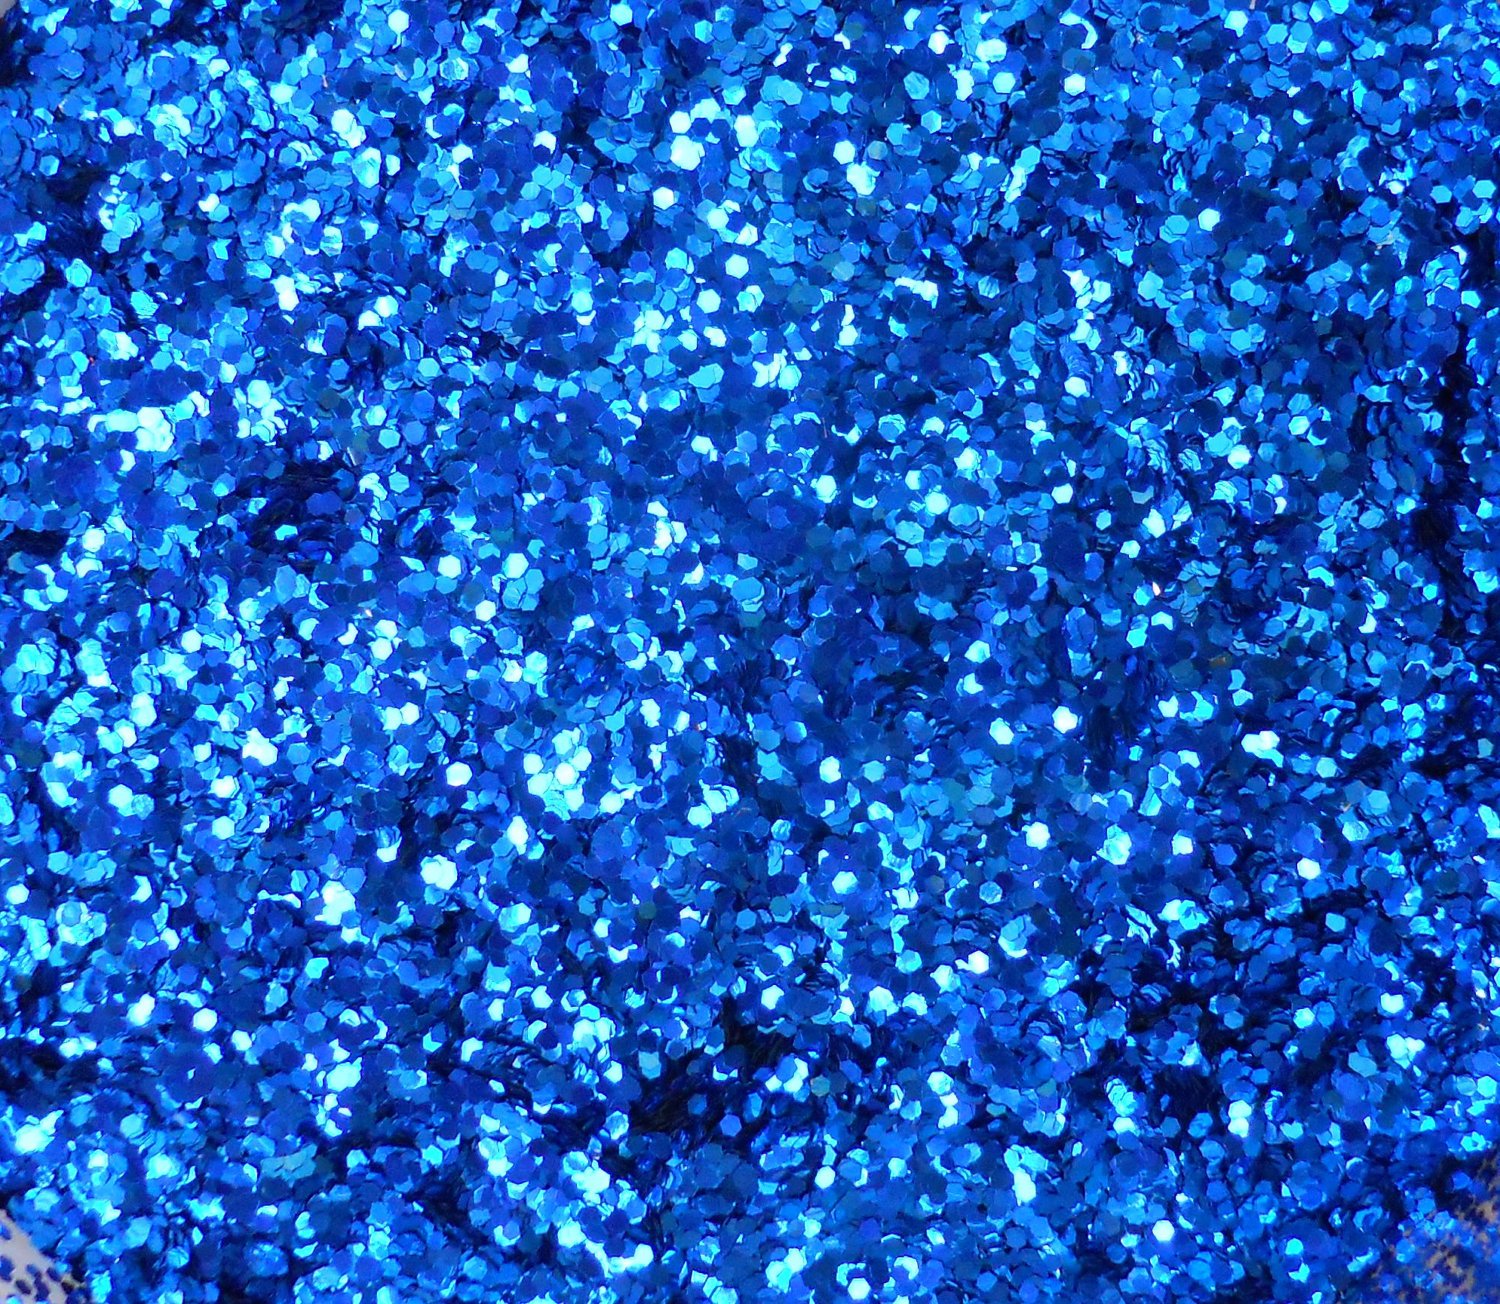 [48+] Blue Sparkle Wallpaper on WallpaperSafari
 Pink And Blue Sparkle Background